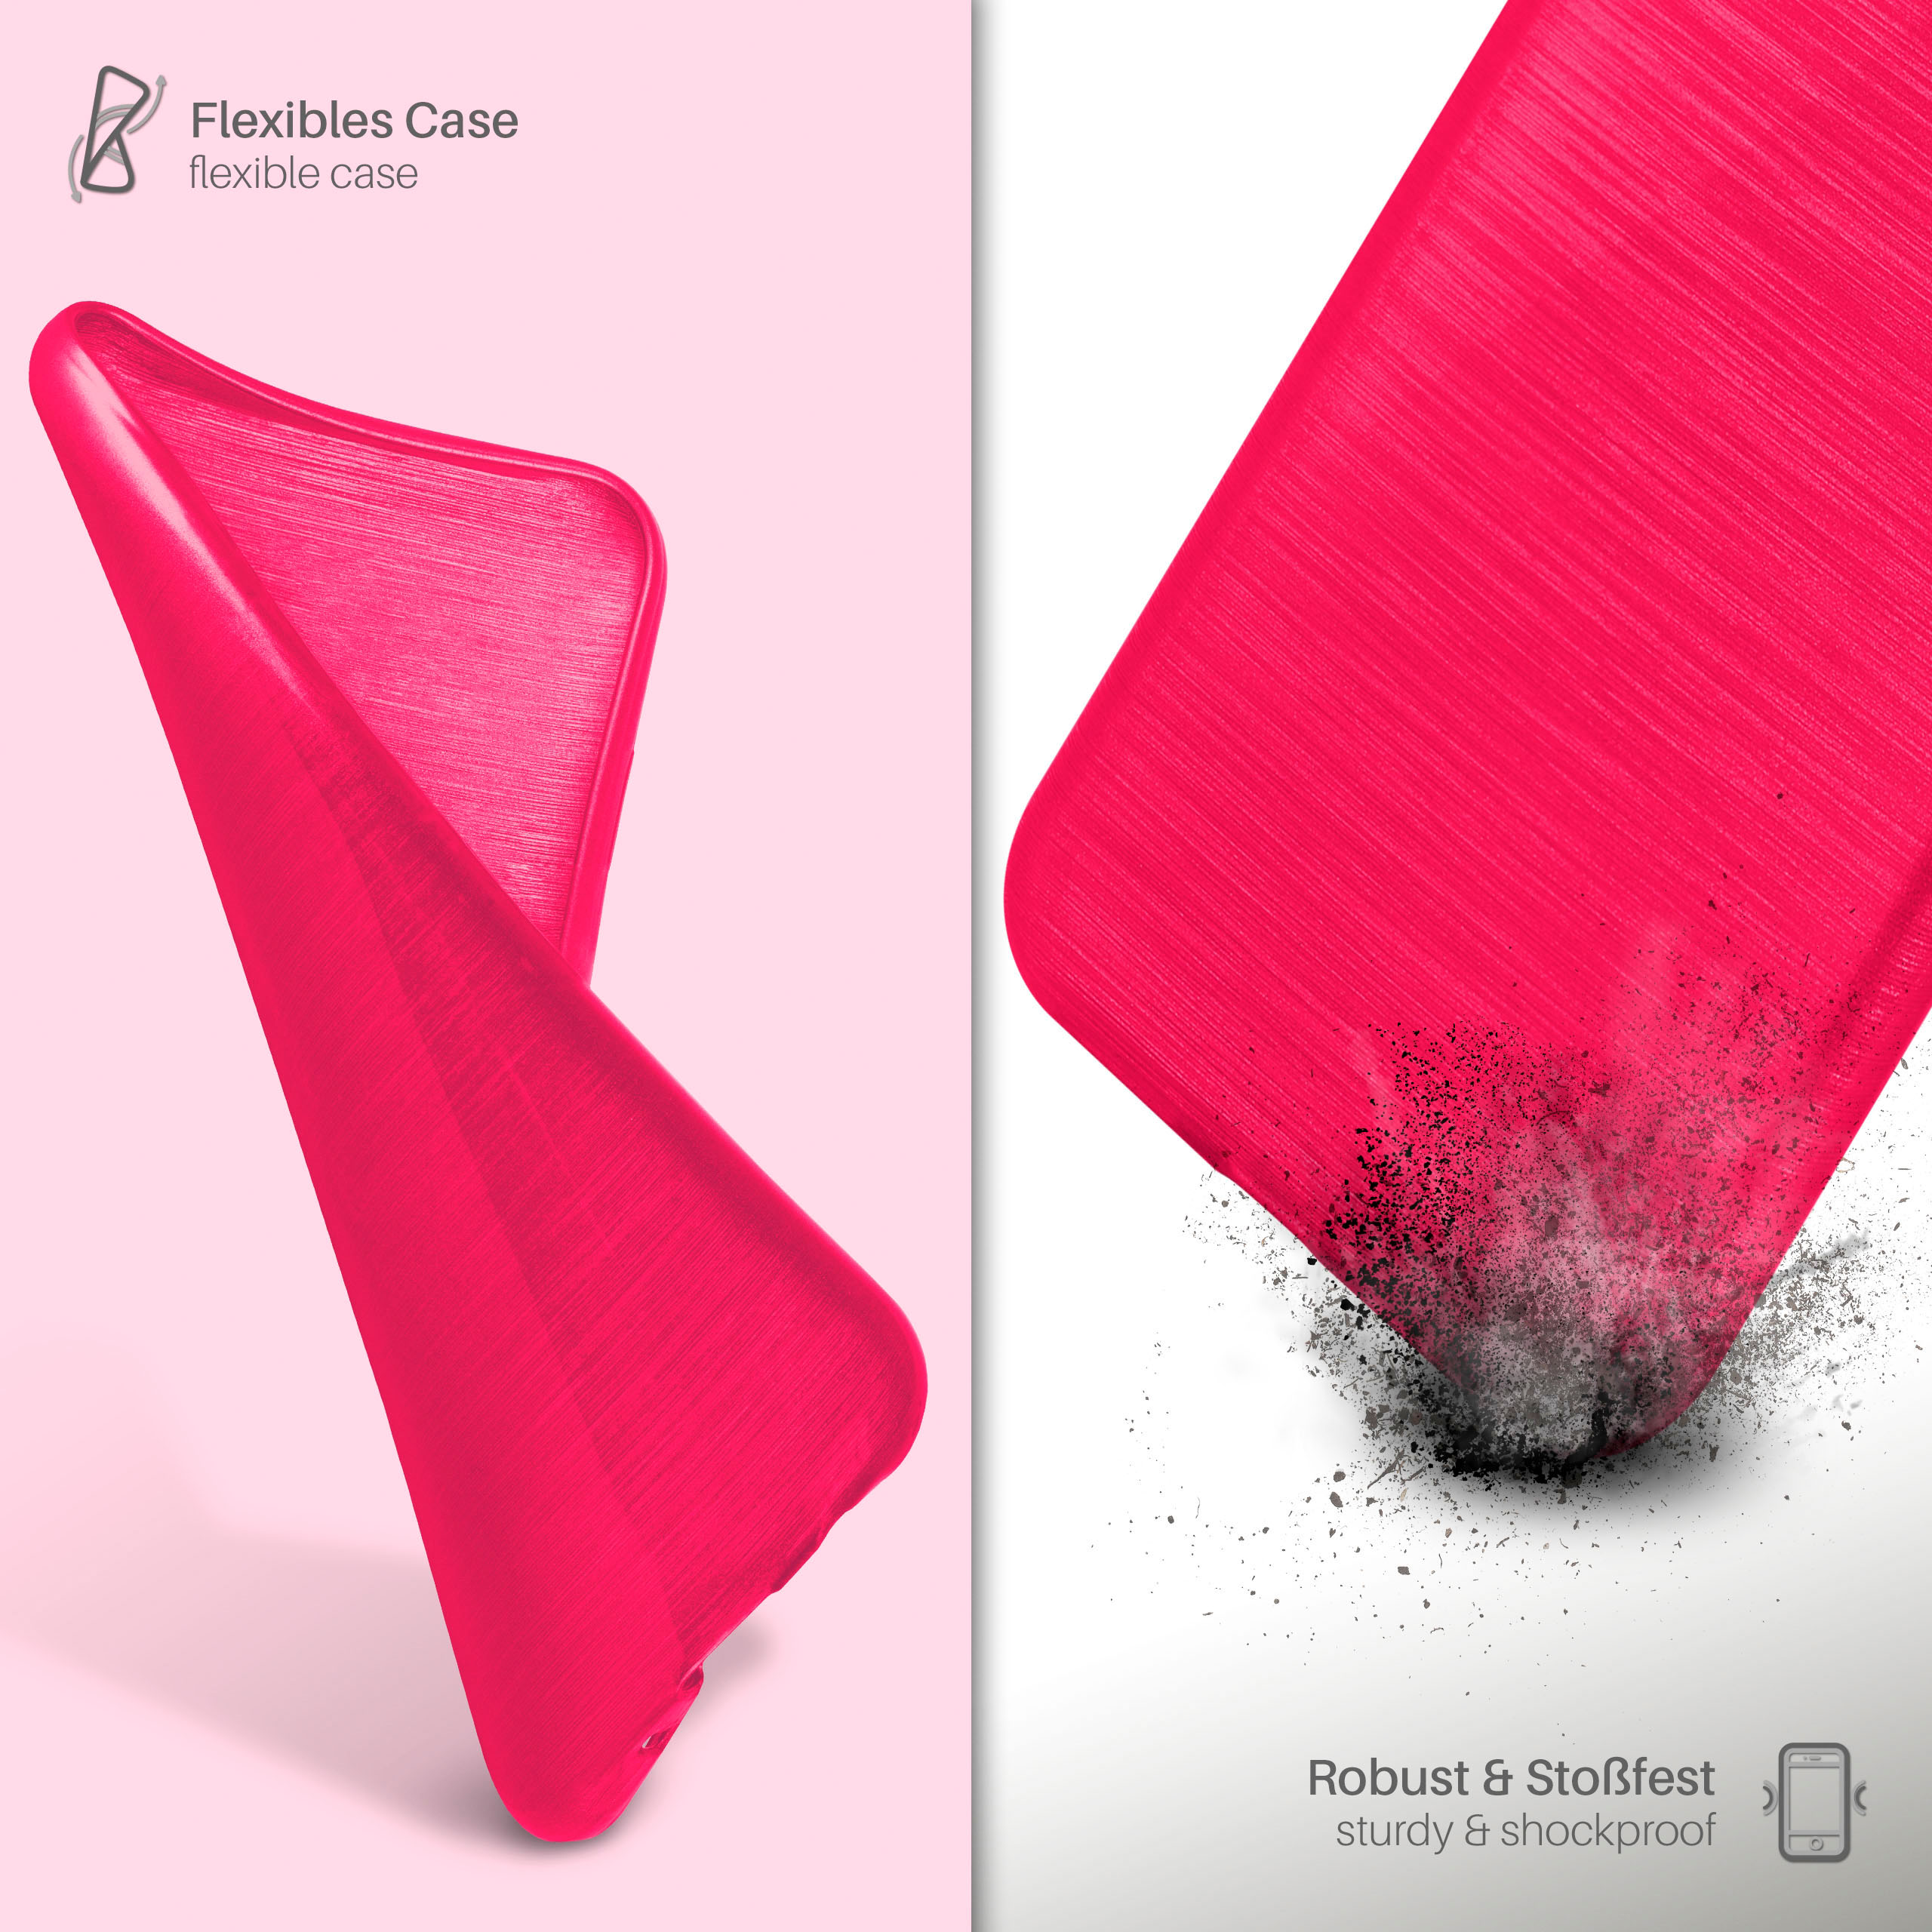 MOEX Brushed Case, Backcover, Galaxy Mini, S3 Magenta-Pink Samsung